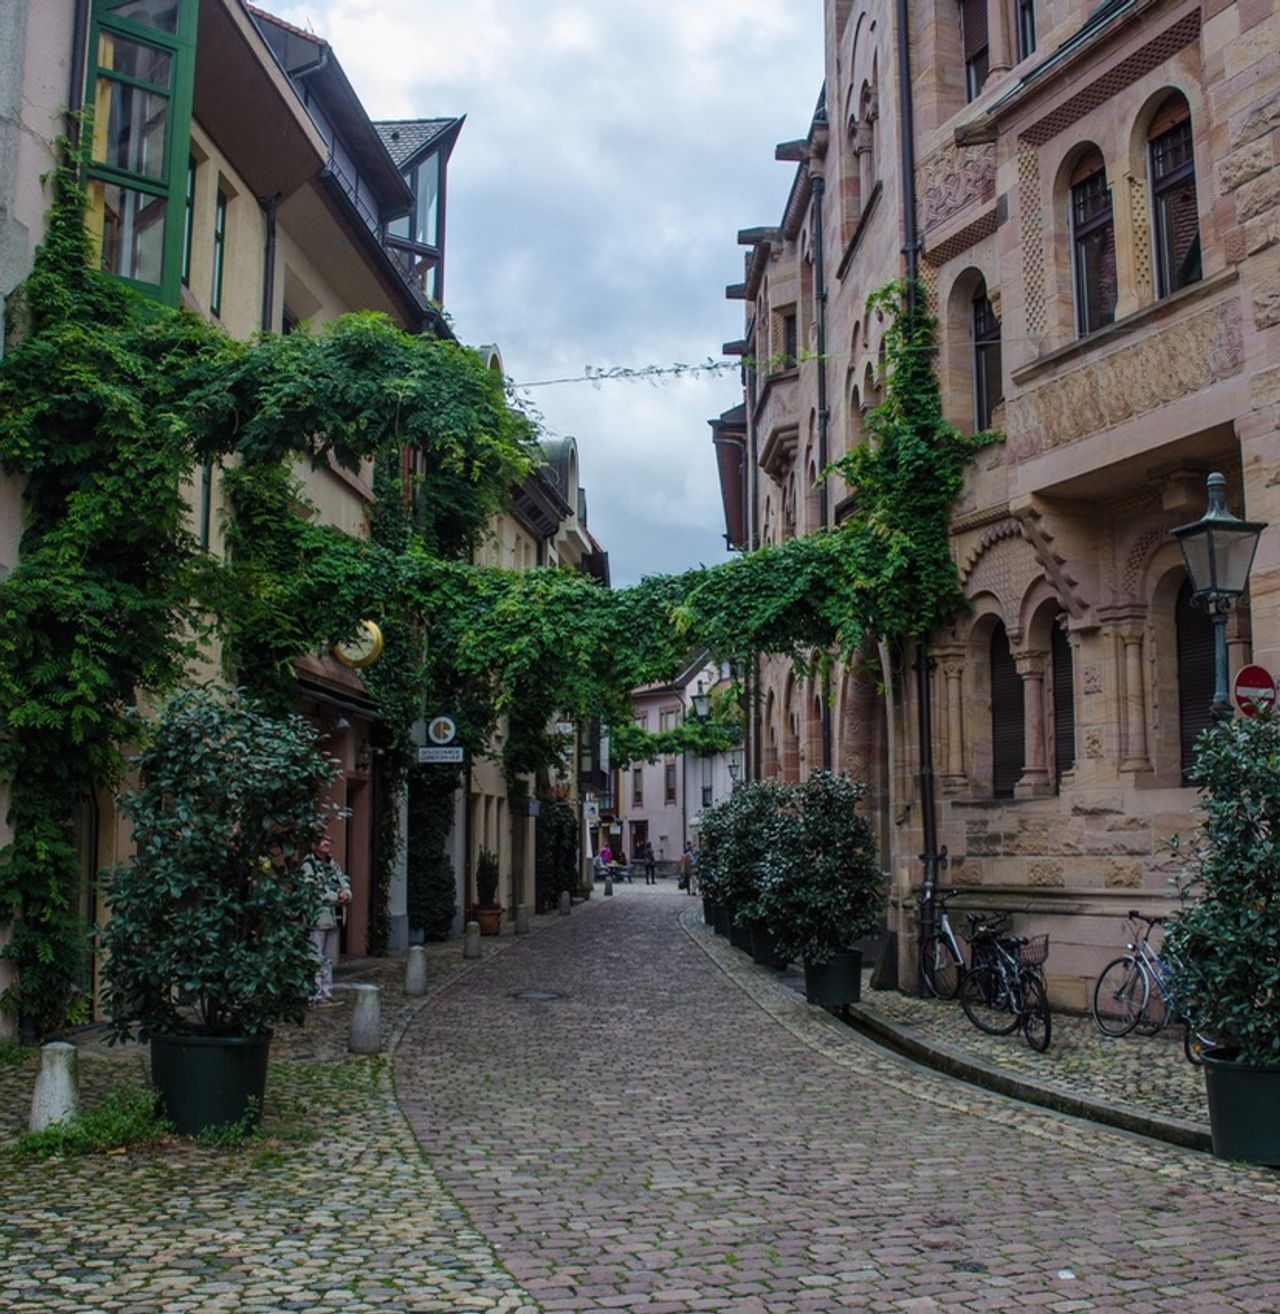 A street with lush, green vines overhead.